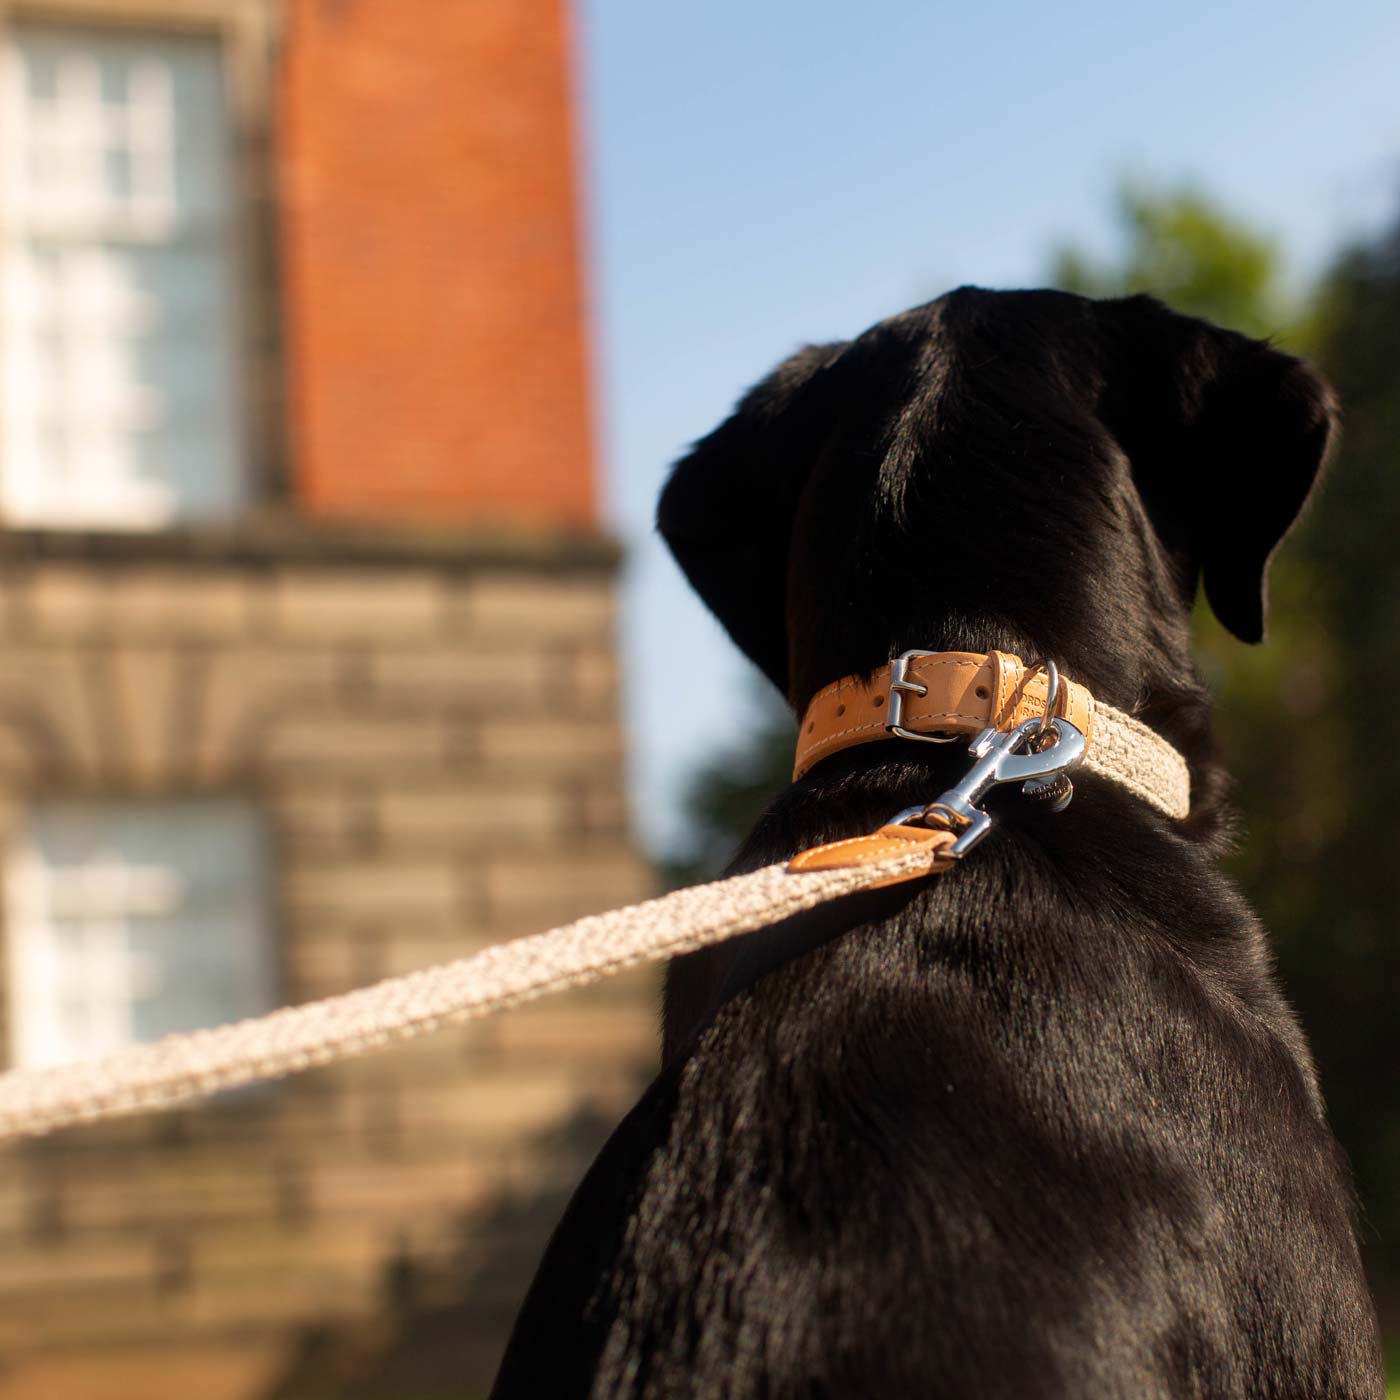 Discover dog walking luxury with our handcrafted Italian dog collar in beautiful pebble with woven grey fabric! The perfect collar for dogs available now at Lords & Labradors US